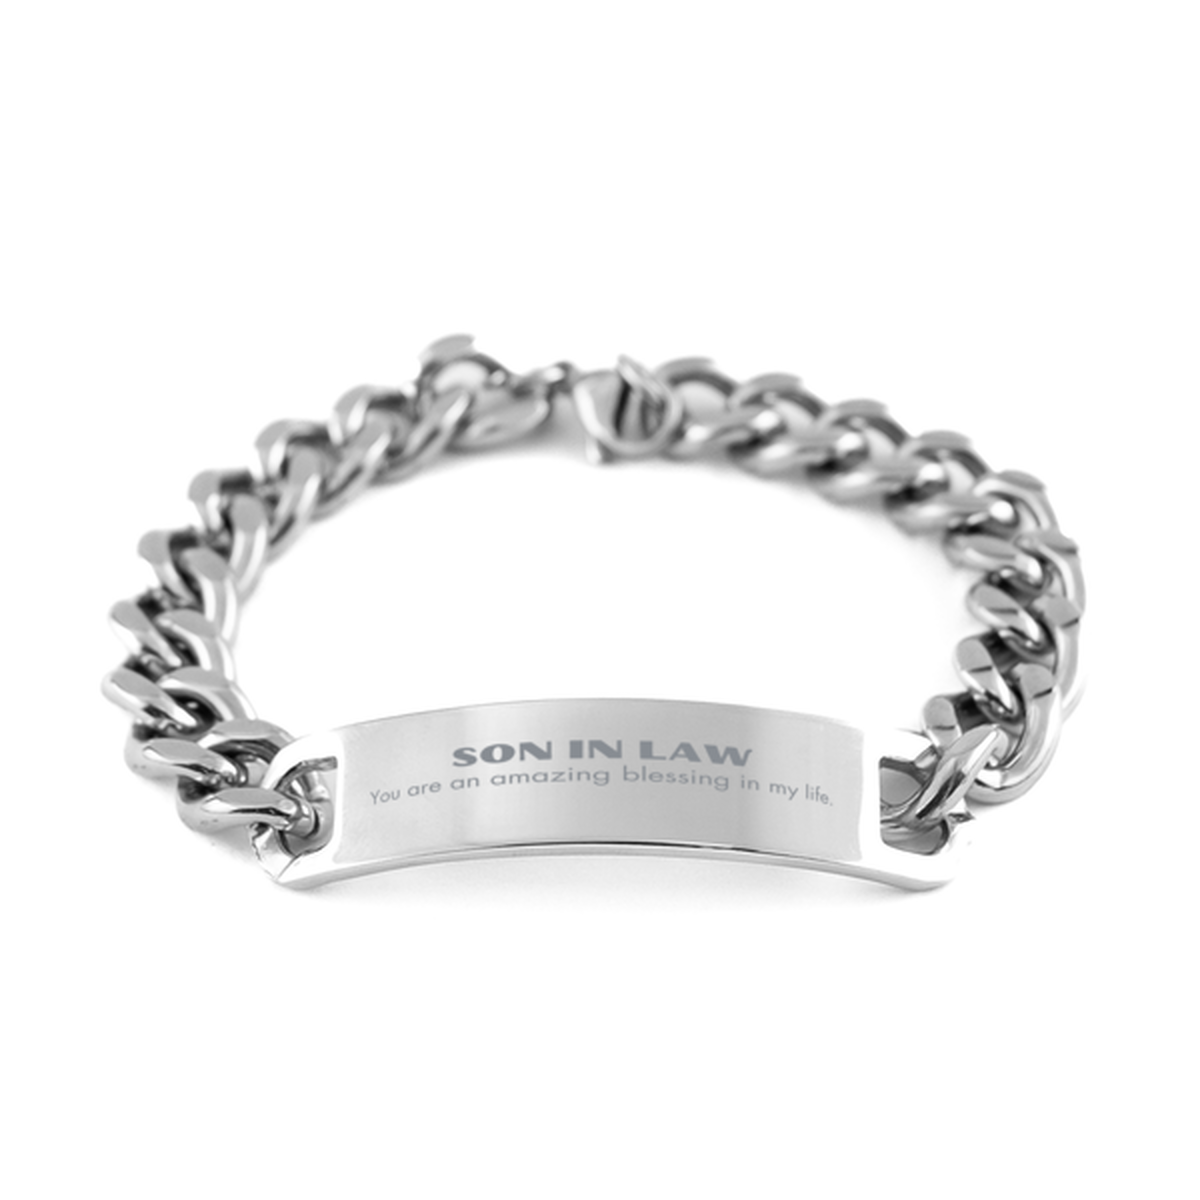 Son In Law Cuban Chain Stainless Steel Bracelet, You are an amazing blessing in my life, Thank You Gifts For Son In Law, Inspirational Birthday Christmas Unique Gifts For Son In Law